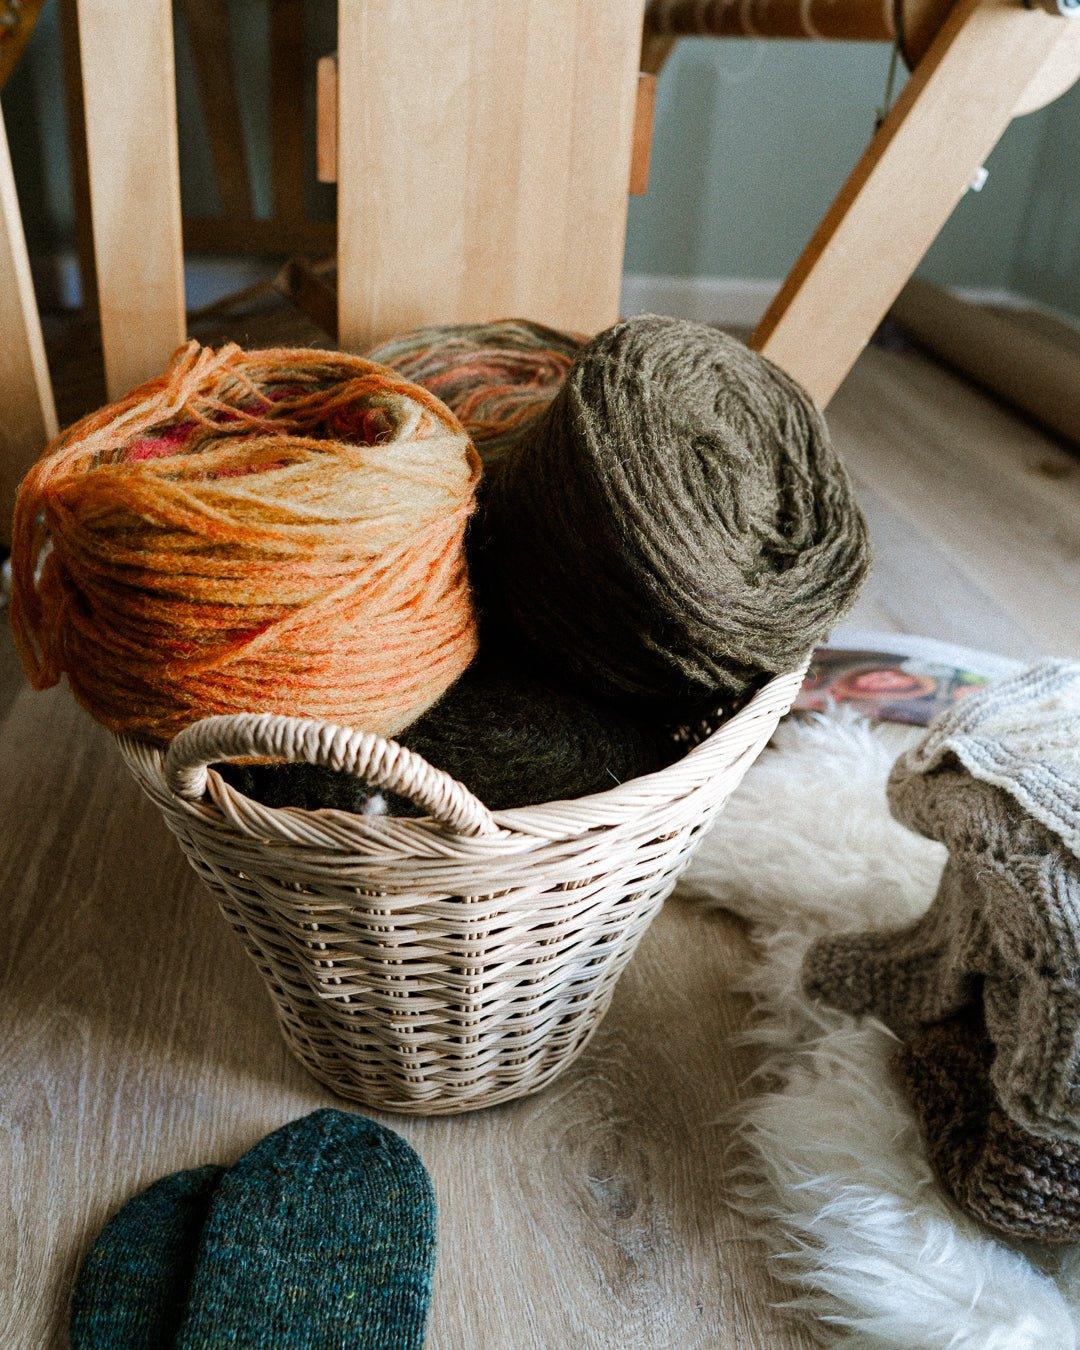 How to work with unspun or woolen spun yarn. - Aimee Sher Makes